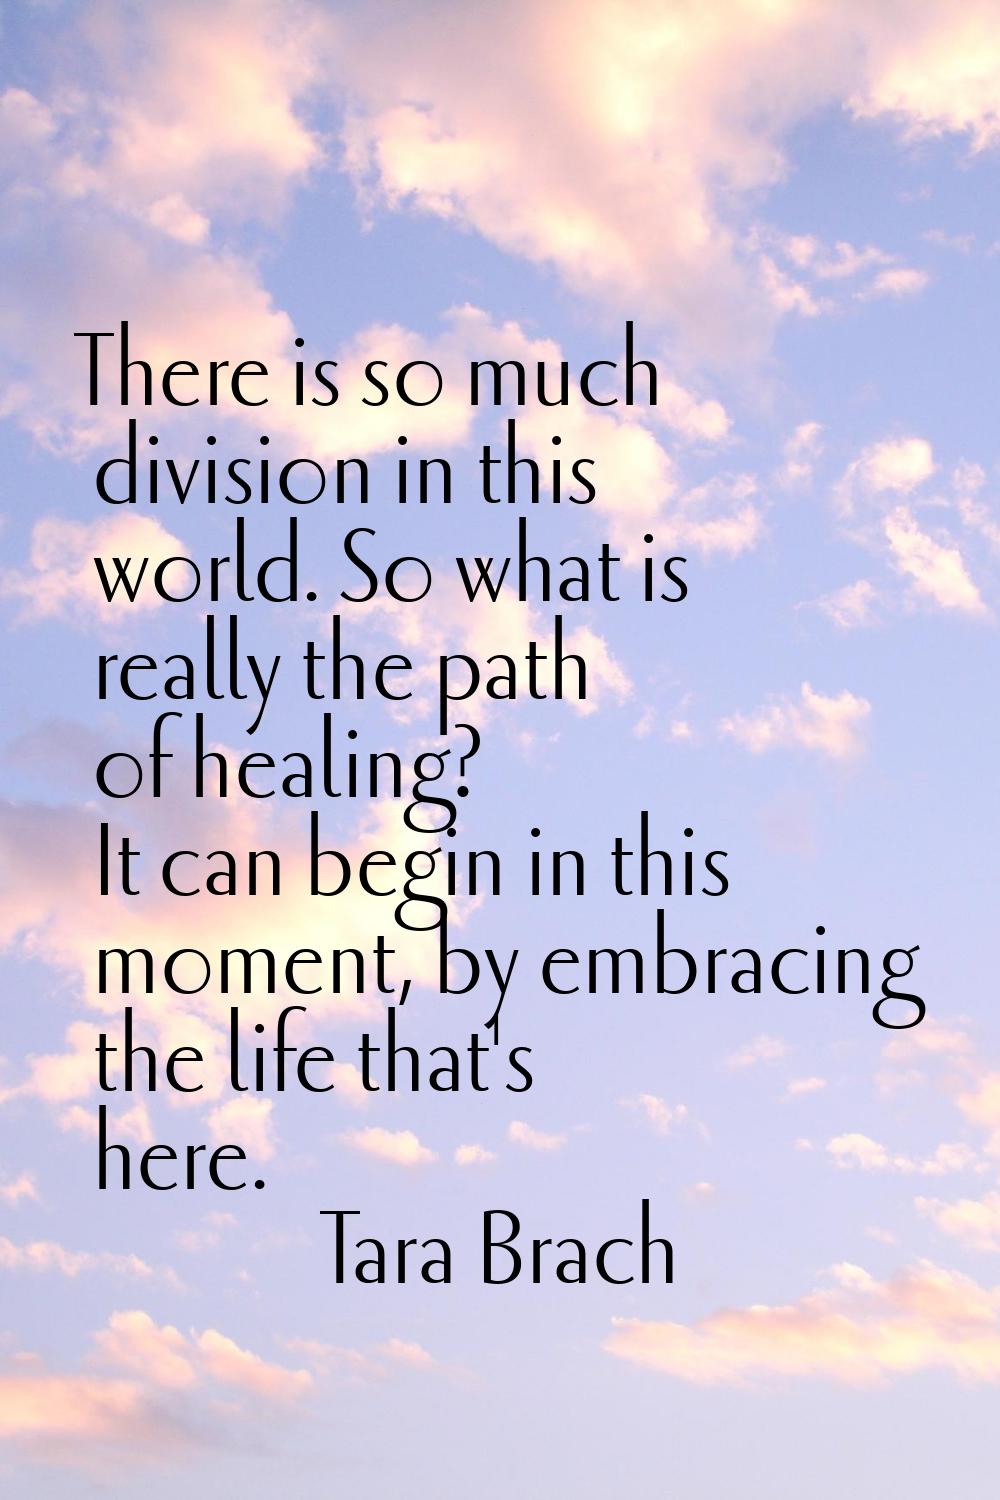 There is so much division in this world. So what is really the path of healing? It can begin in thi